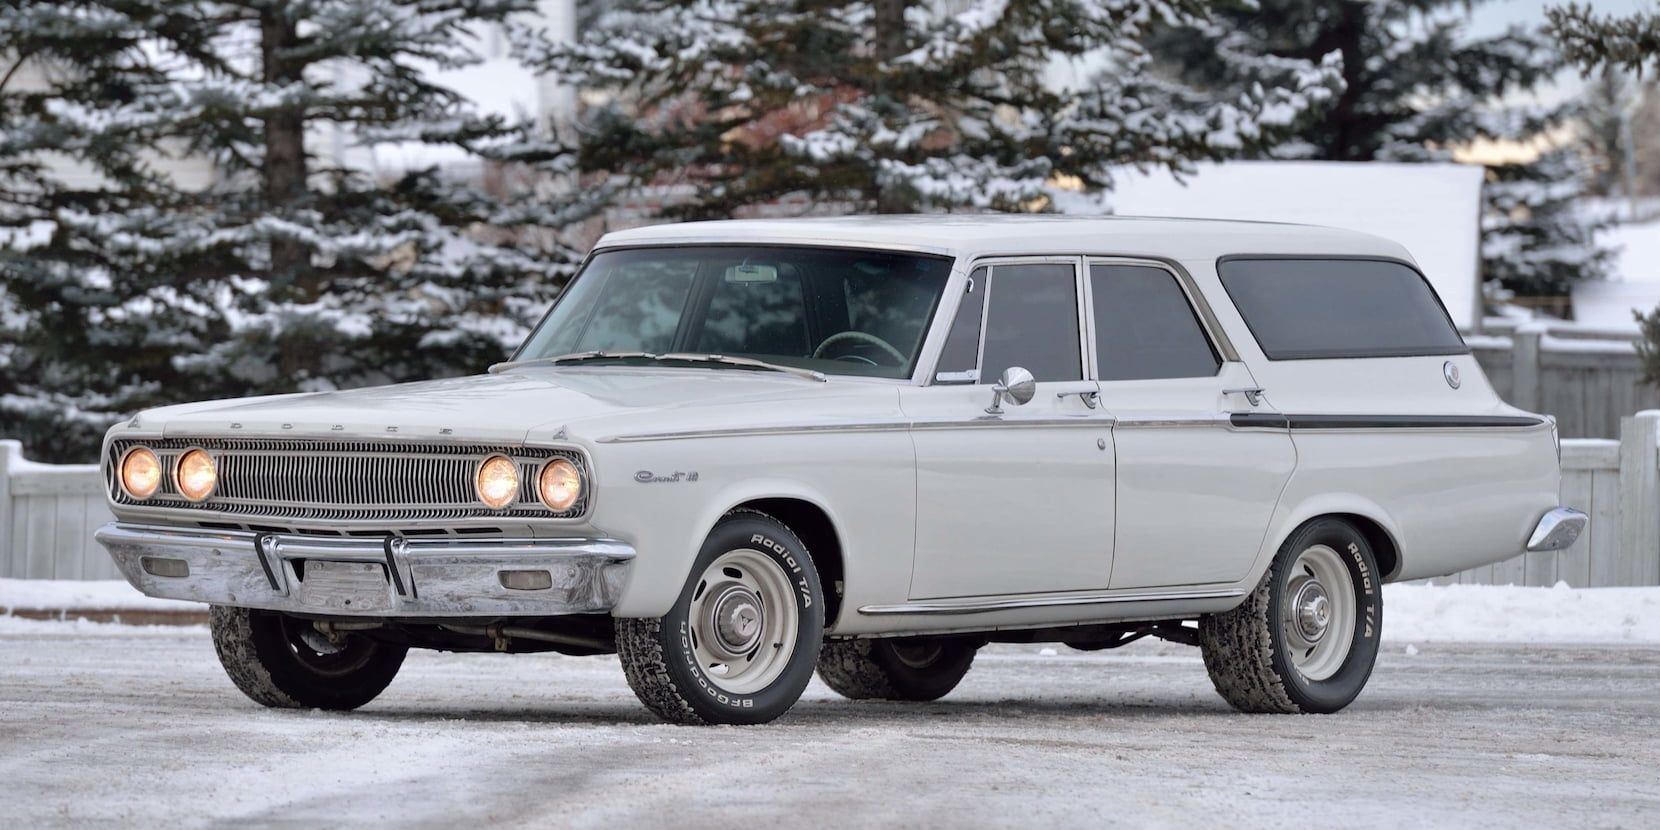 10 Station Wagons That Pack A Mean Punch